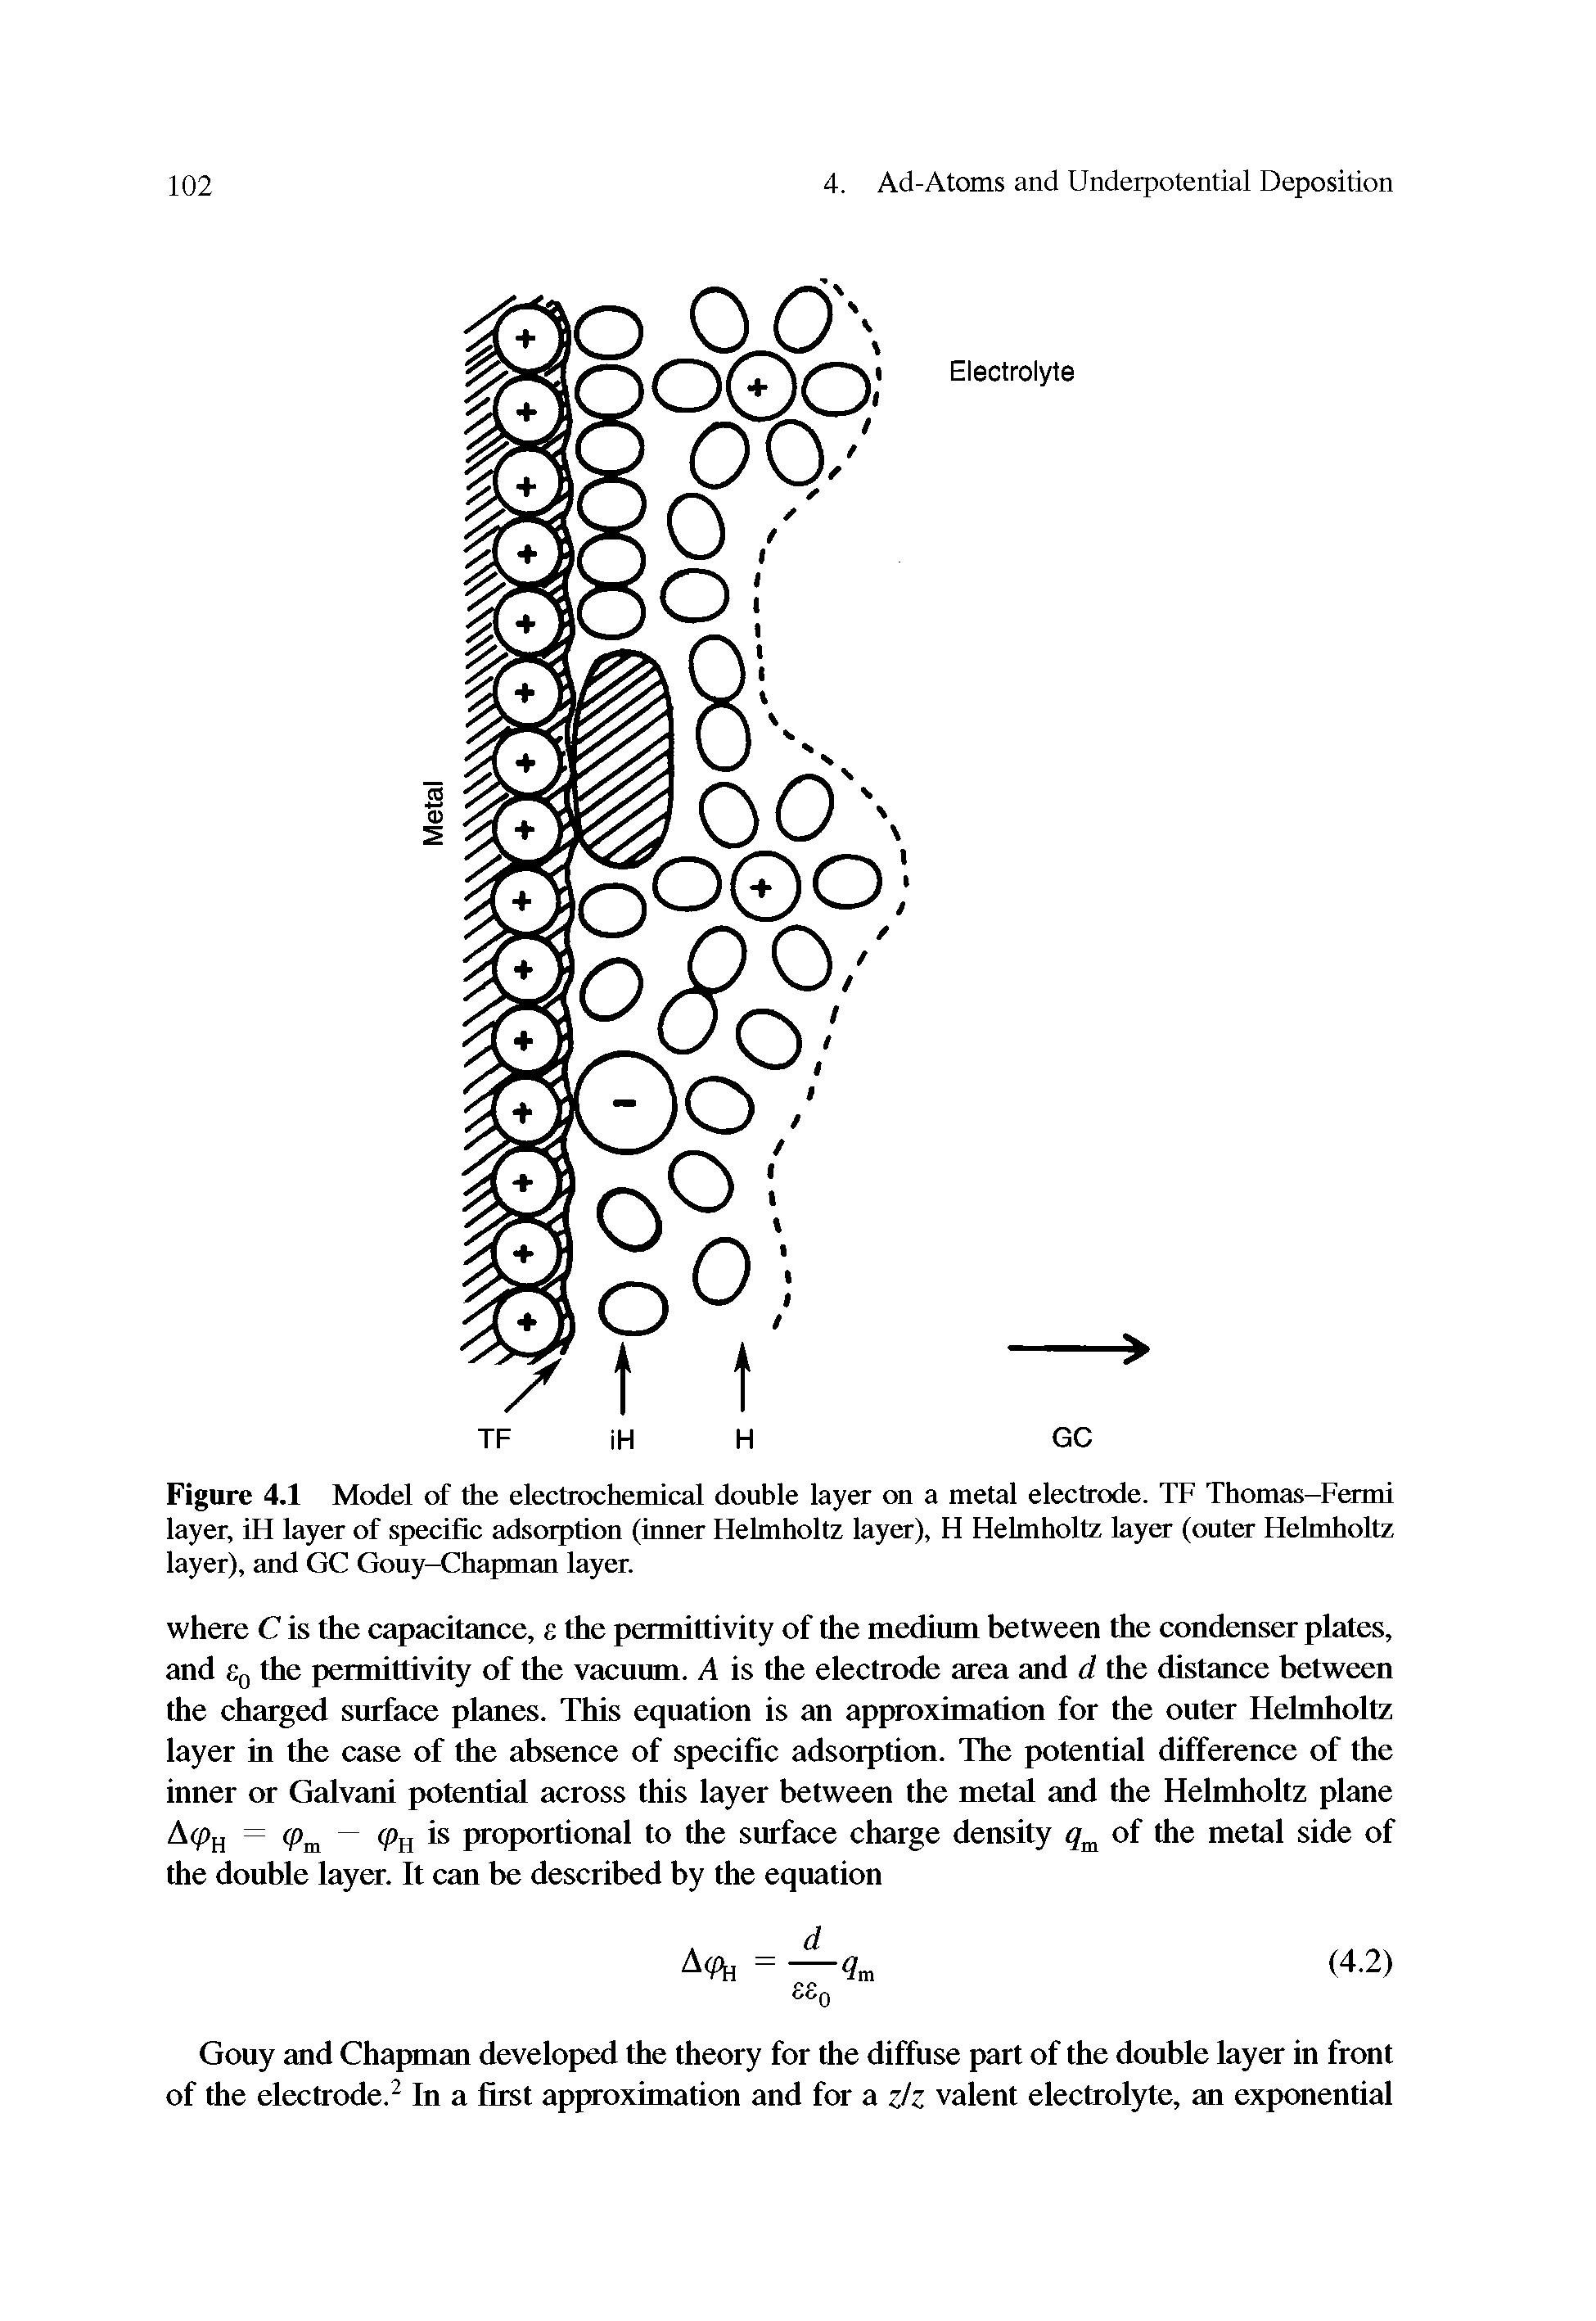 Figure 4.1 Model of the electrochemical double layer on a metal electrode. TF Thomas-Fermi layer, iH layer of specific adsorption (inner Helmholtz layer), H Helmholtz layer (outer Helmholtz layer), and GC Gouy-Chapman layer.